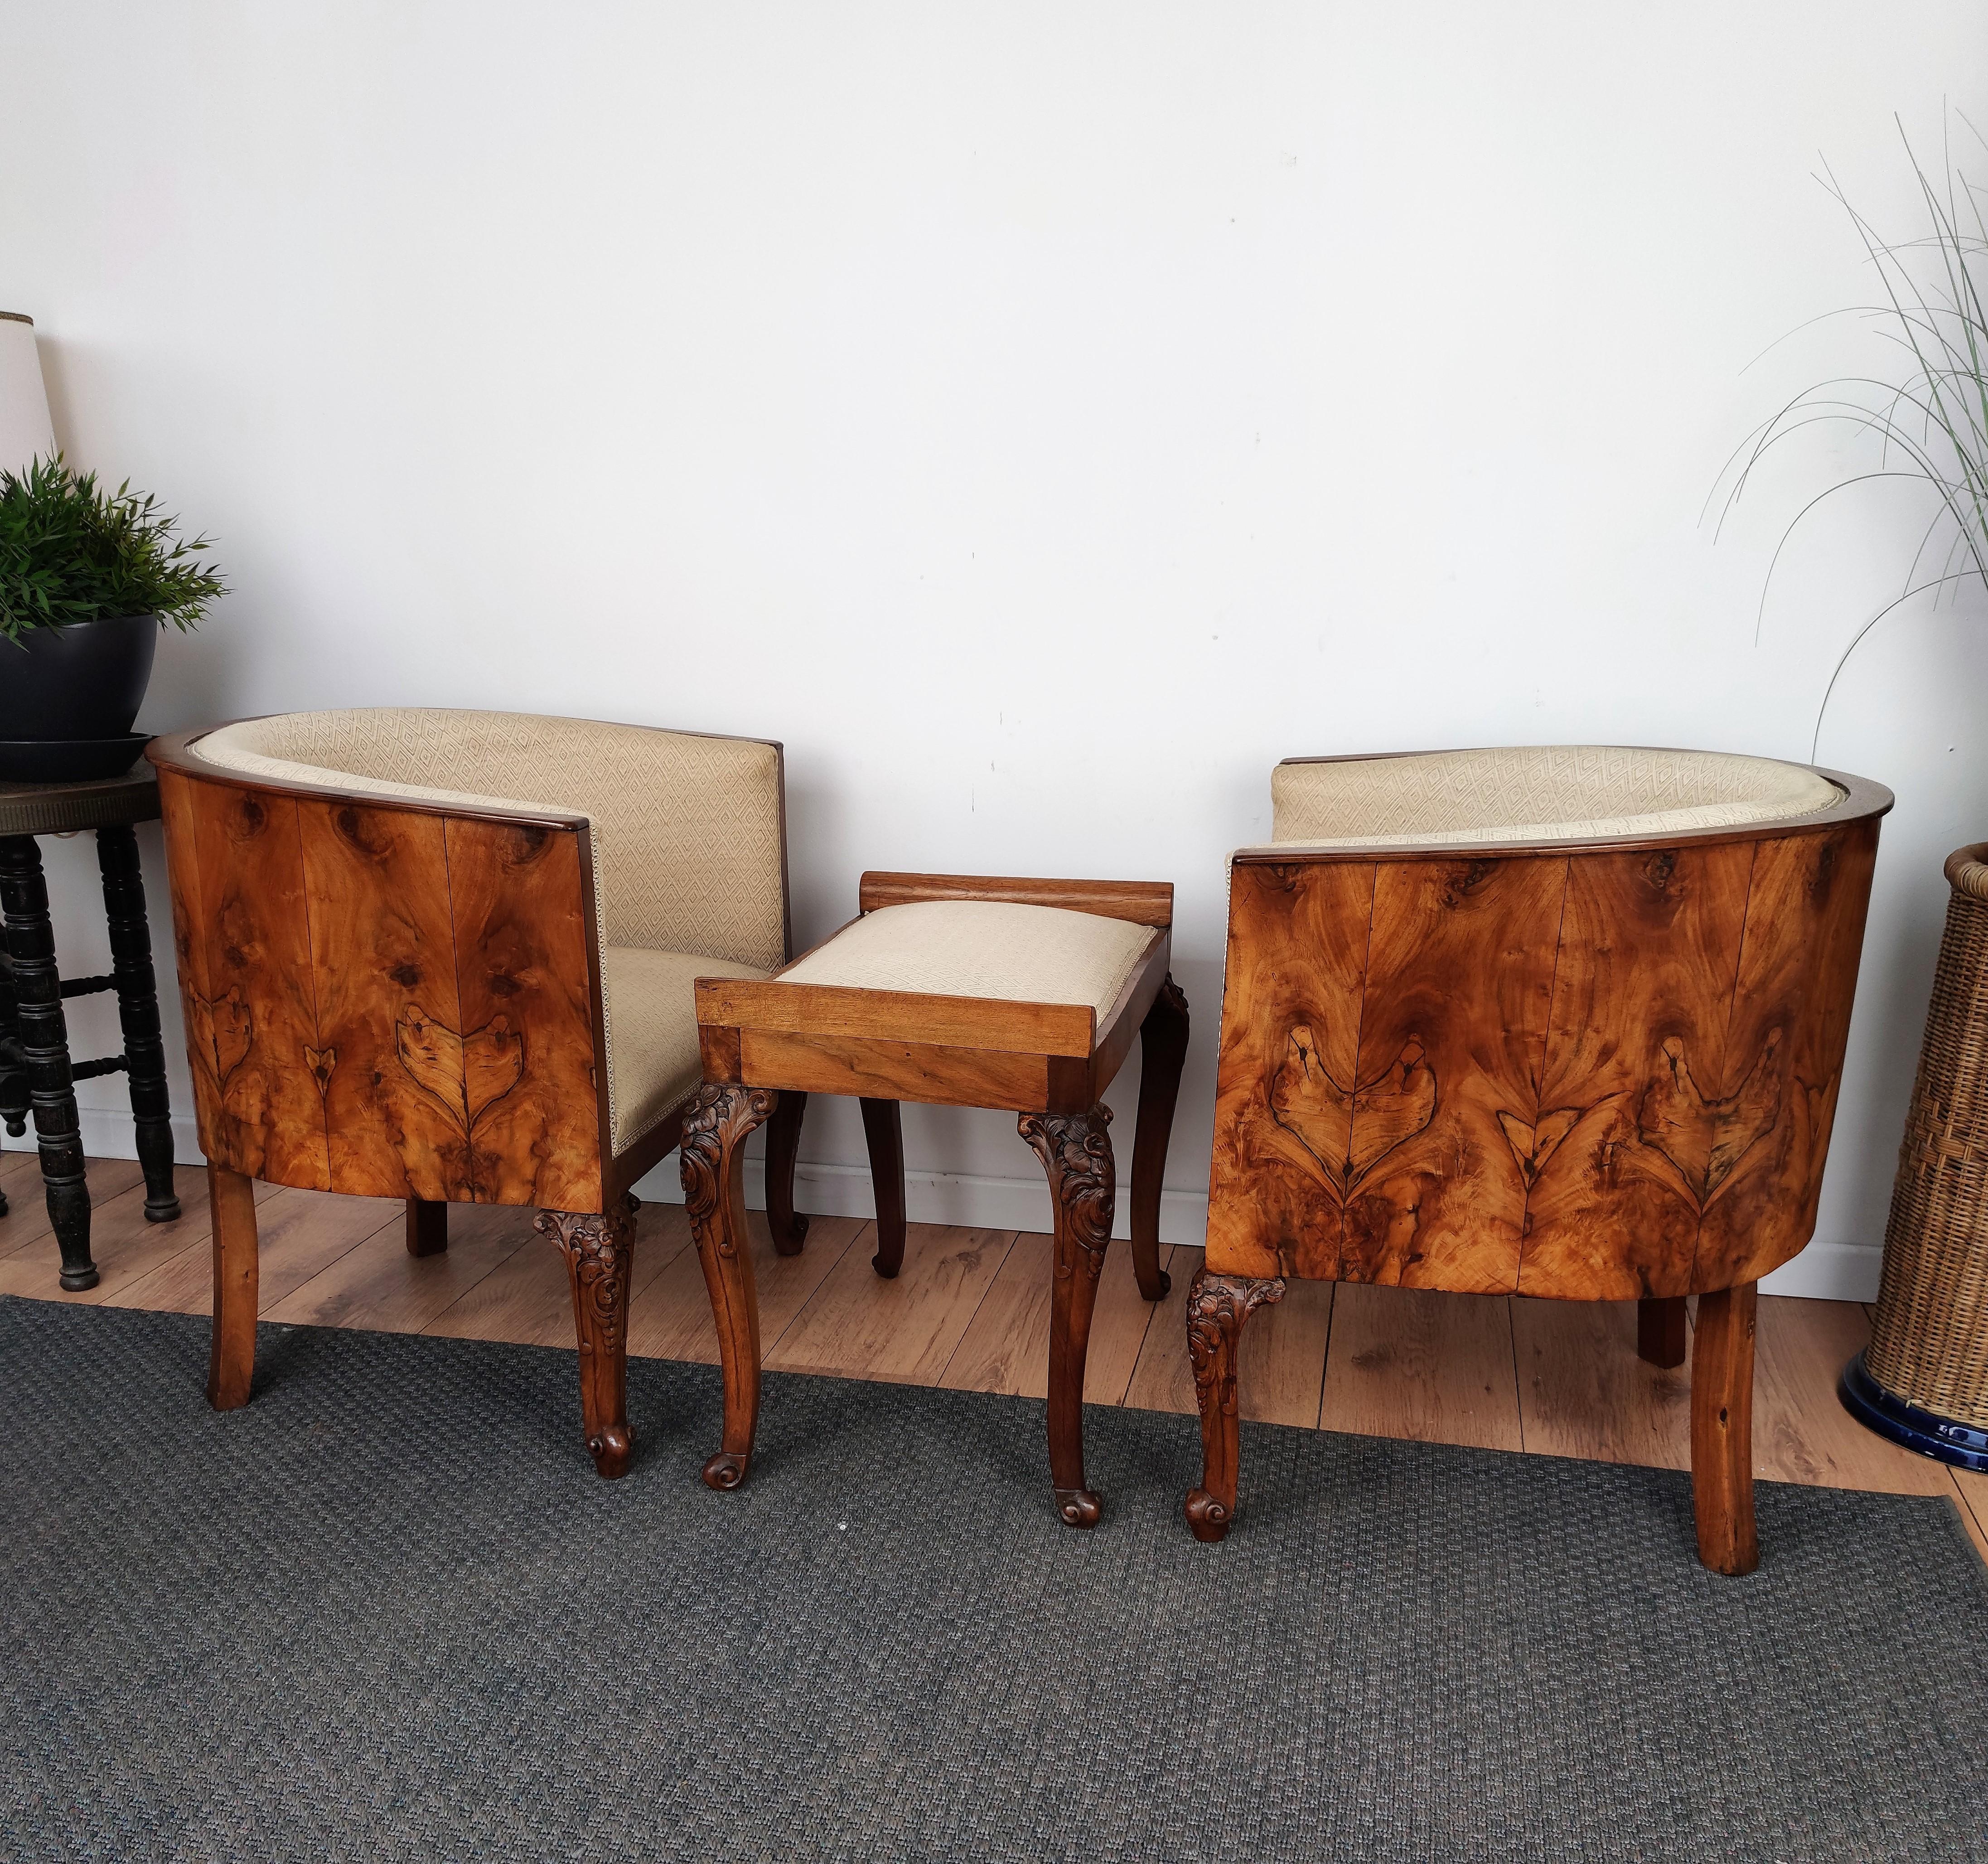 Very elegant and refined Italian 1940s midcentury Art Deco armchairs and stool with beautiful veneer burl walnut briar wood all around and great decorated legs. This set makes a great look in any style room, as a complementary design and especially